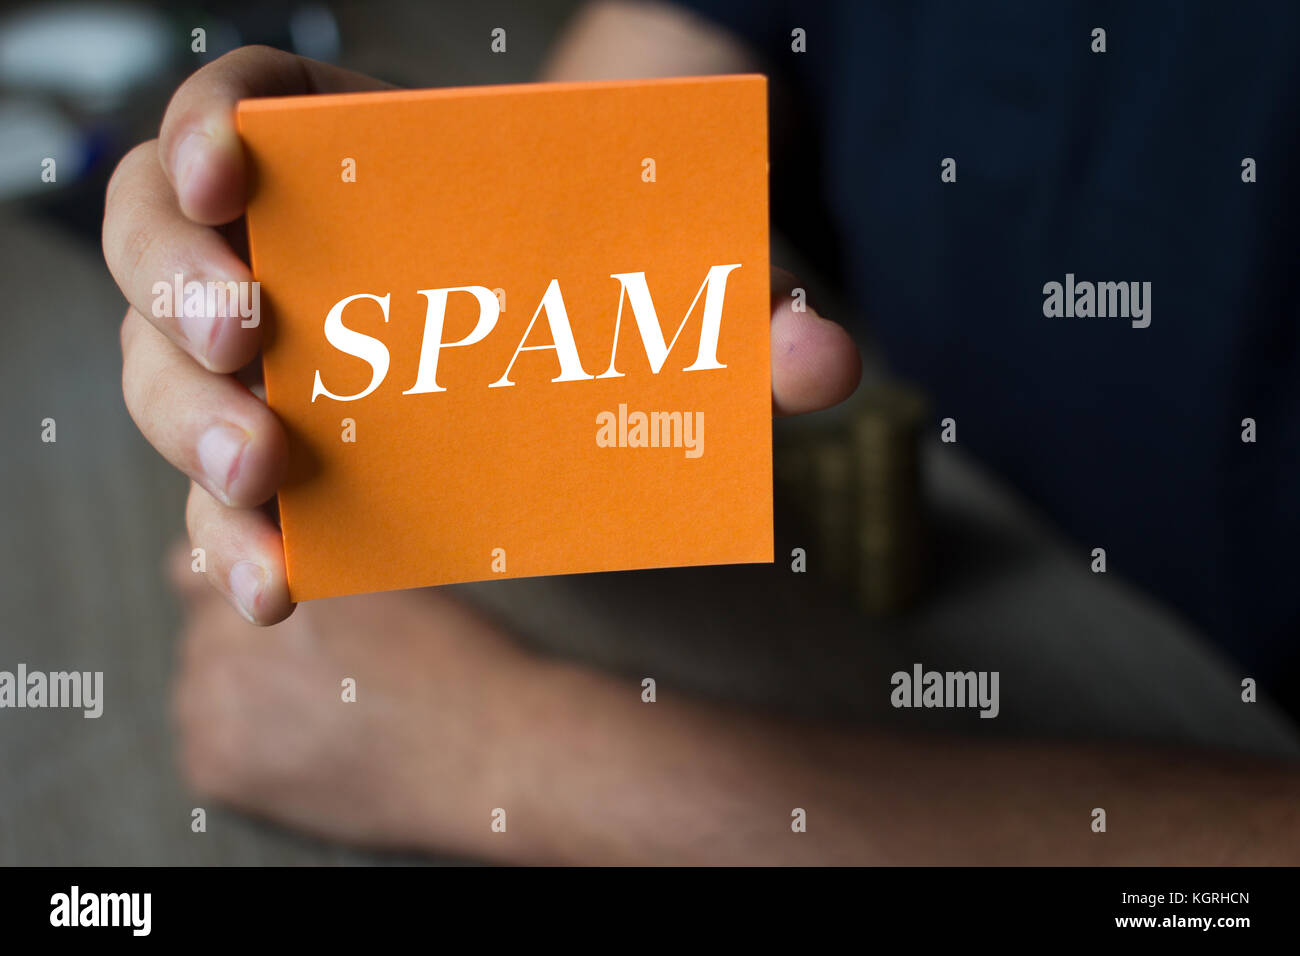 Spam, Technology Concept Stock Photo